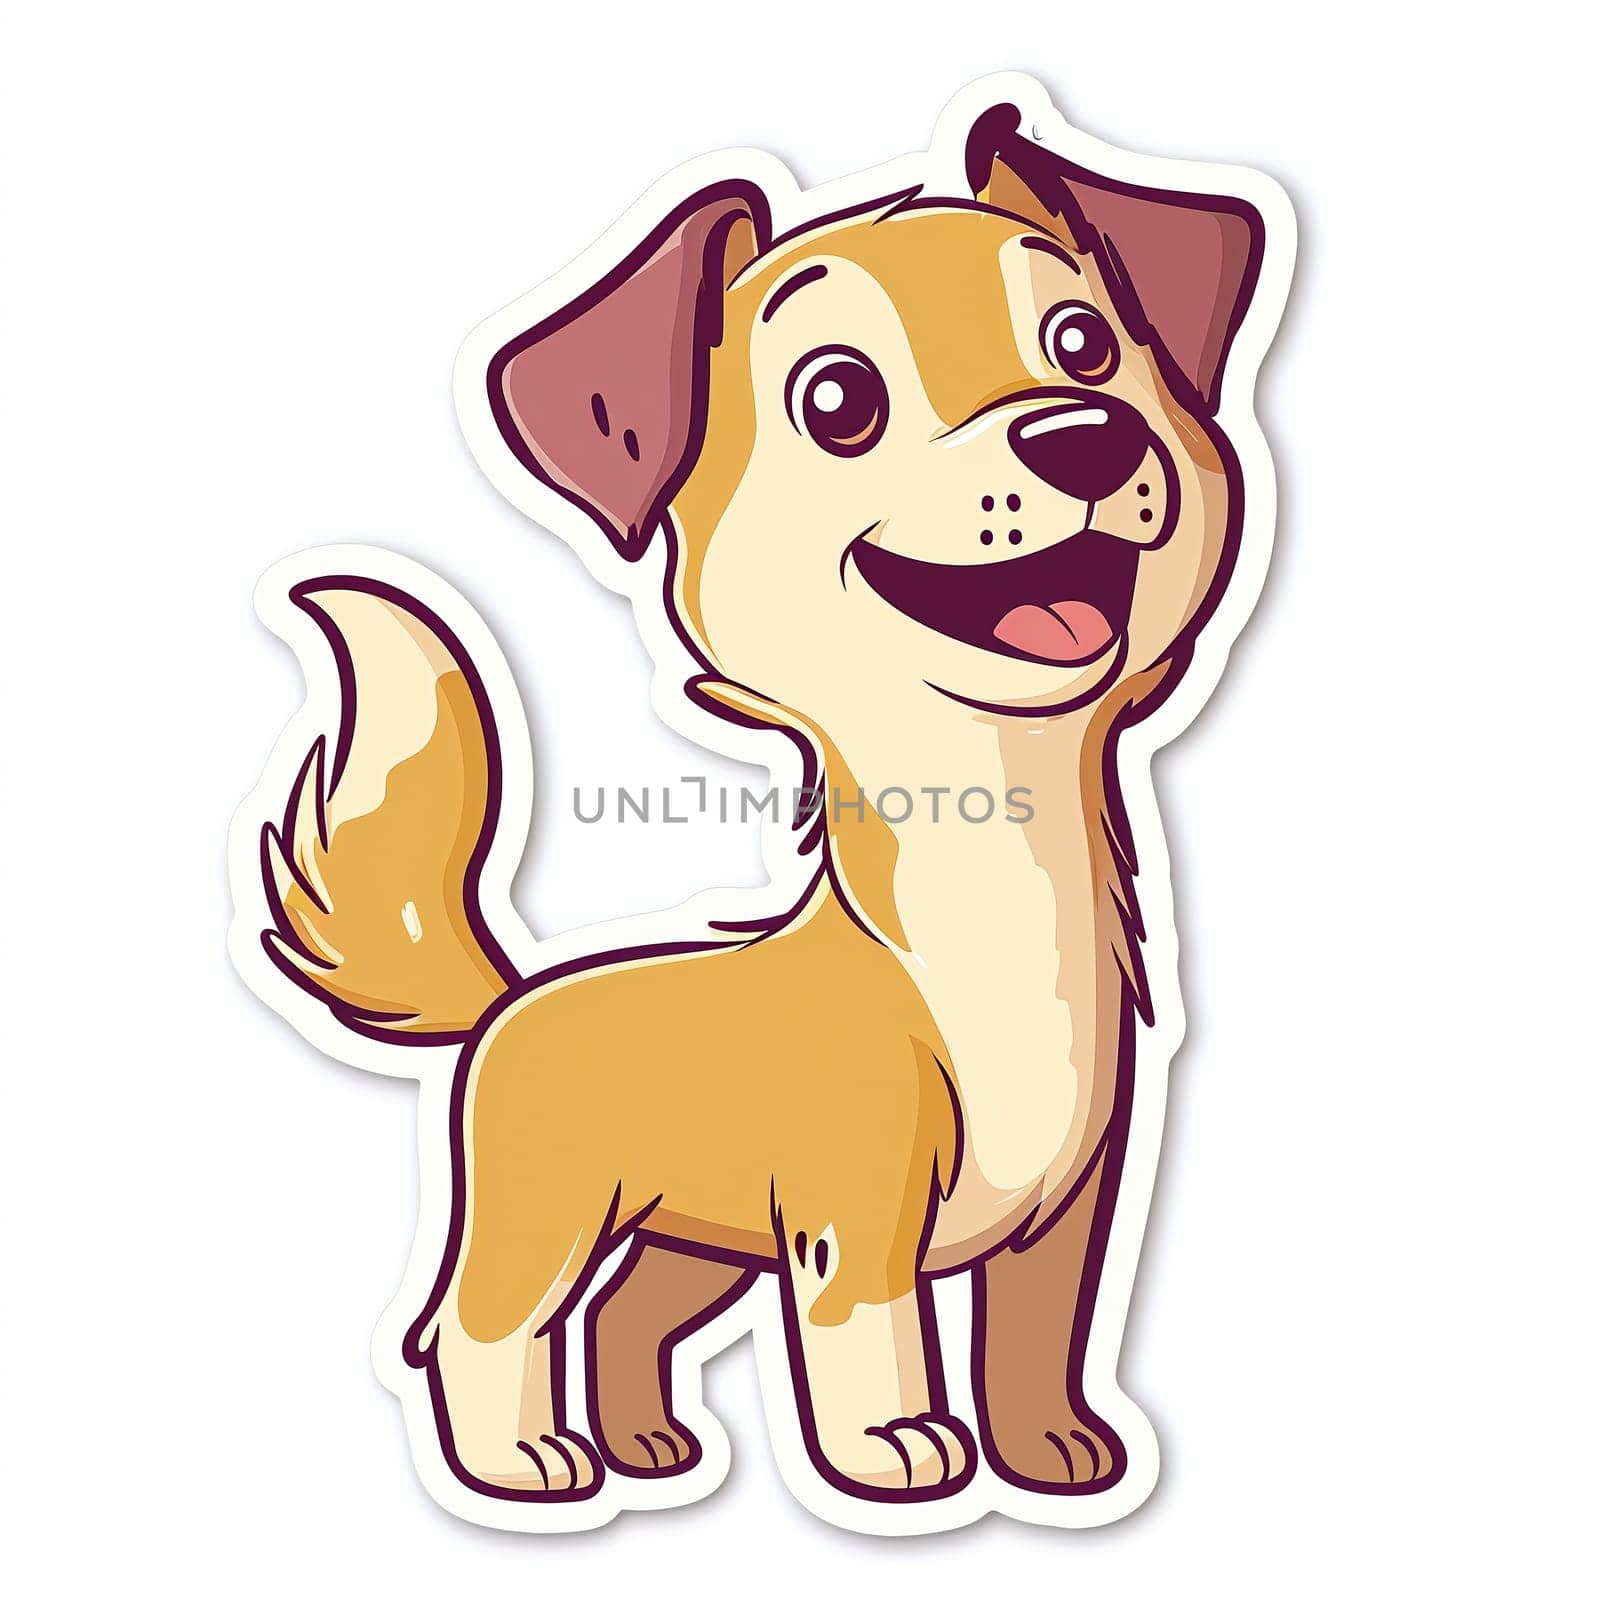 A whimsical illustration of a smiling cartoon dog, perfect as a playful sticker or cheerful mascot by chrisroll